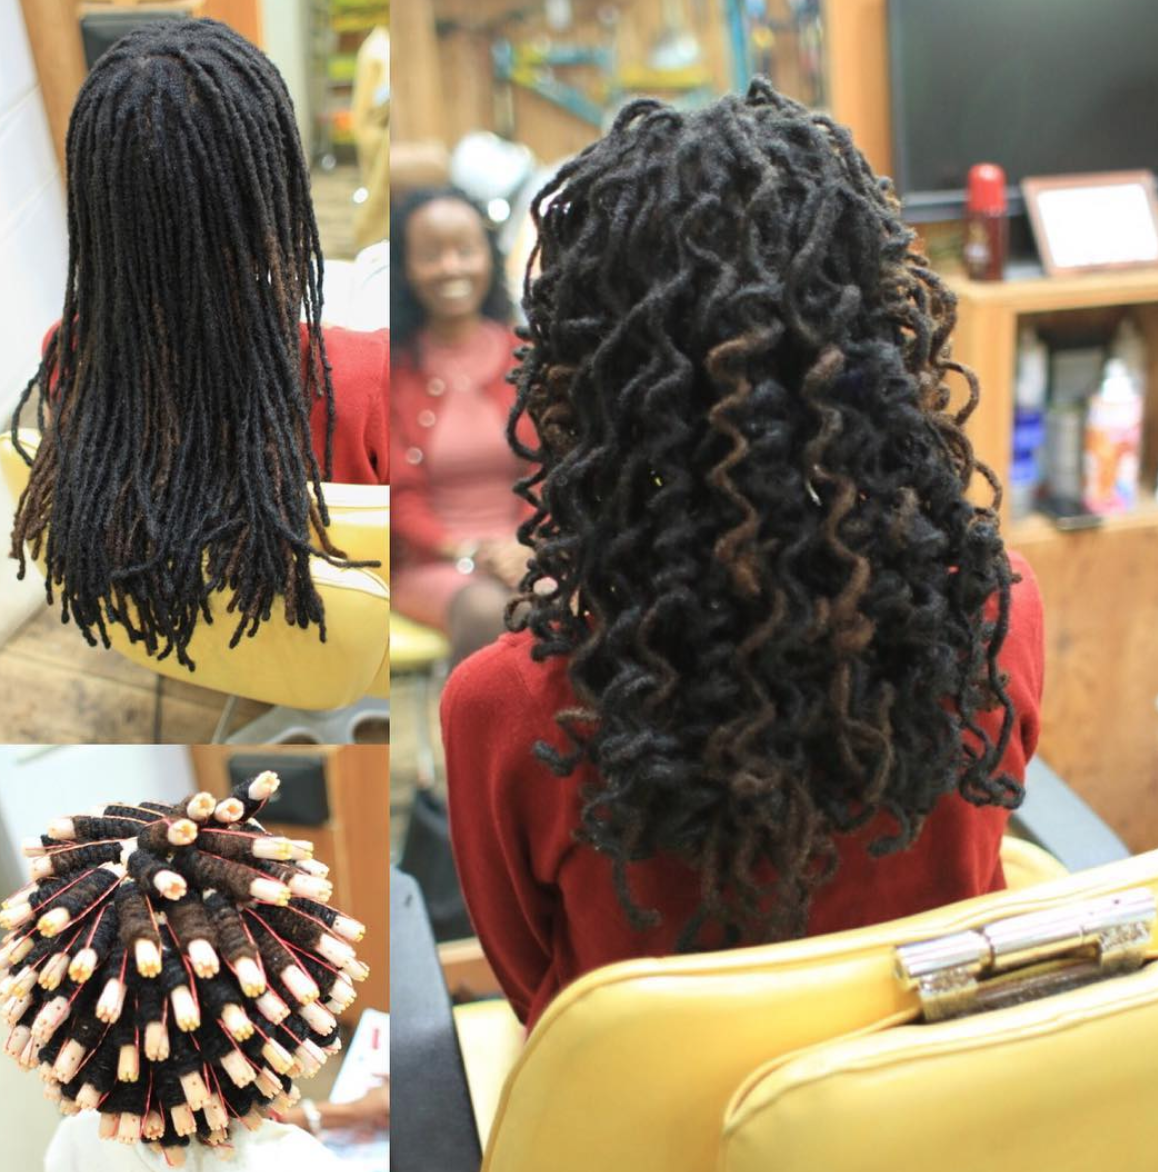 Designer Perm Wrap - Spiral Perm Wrap And Results From Different Angles Per...